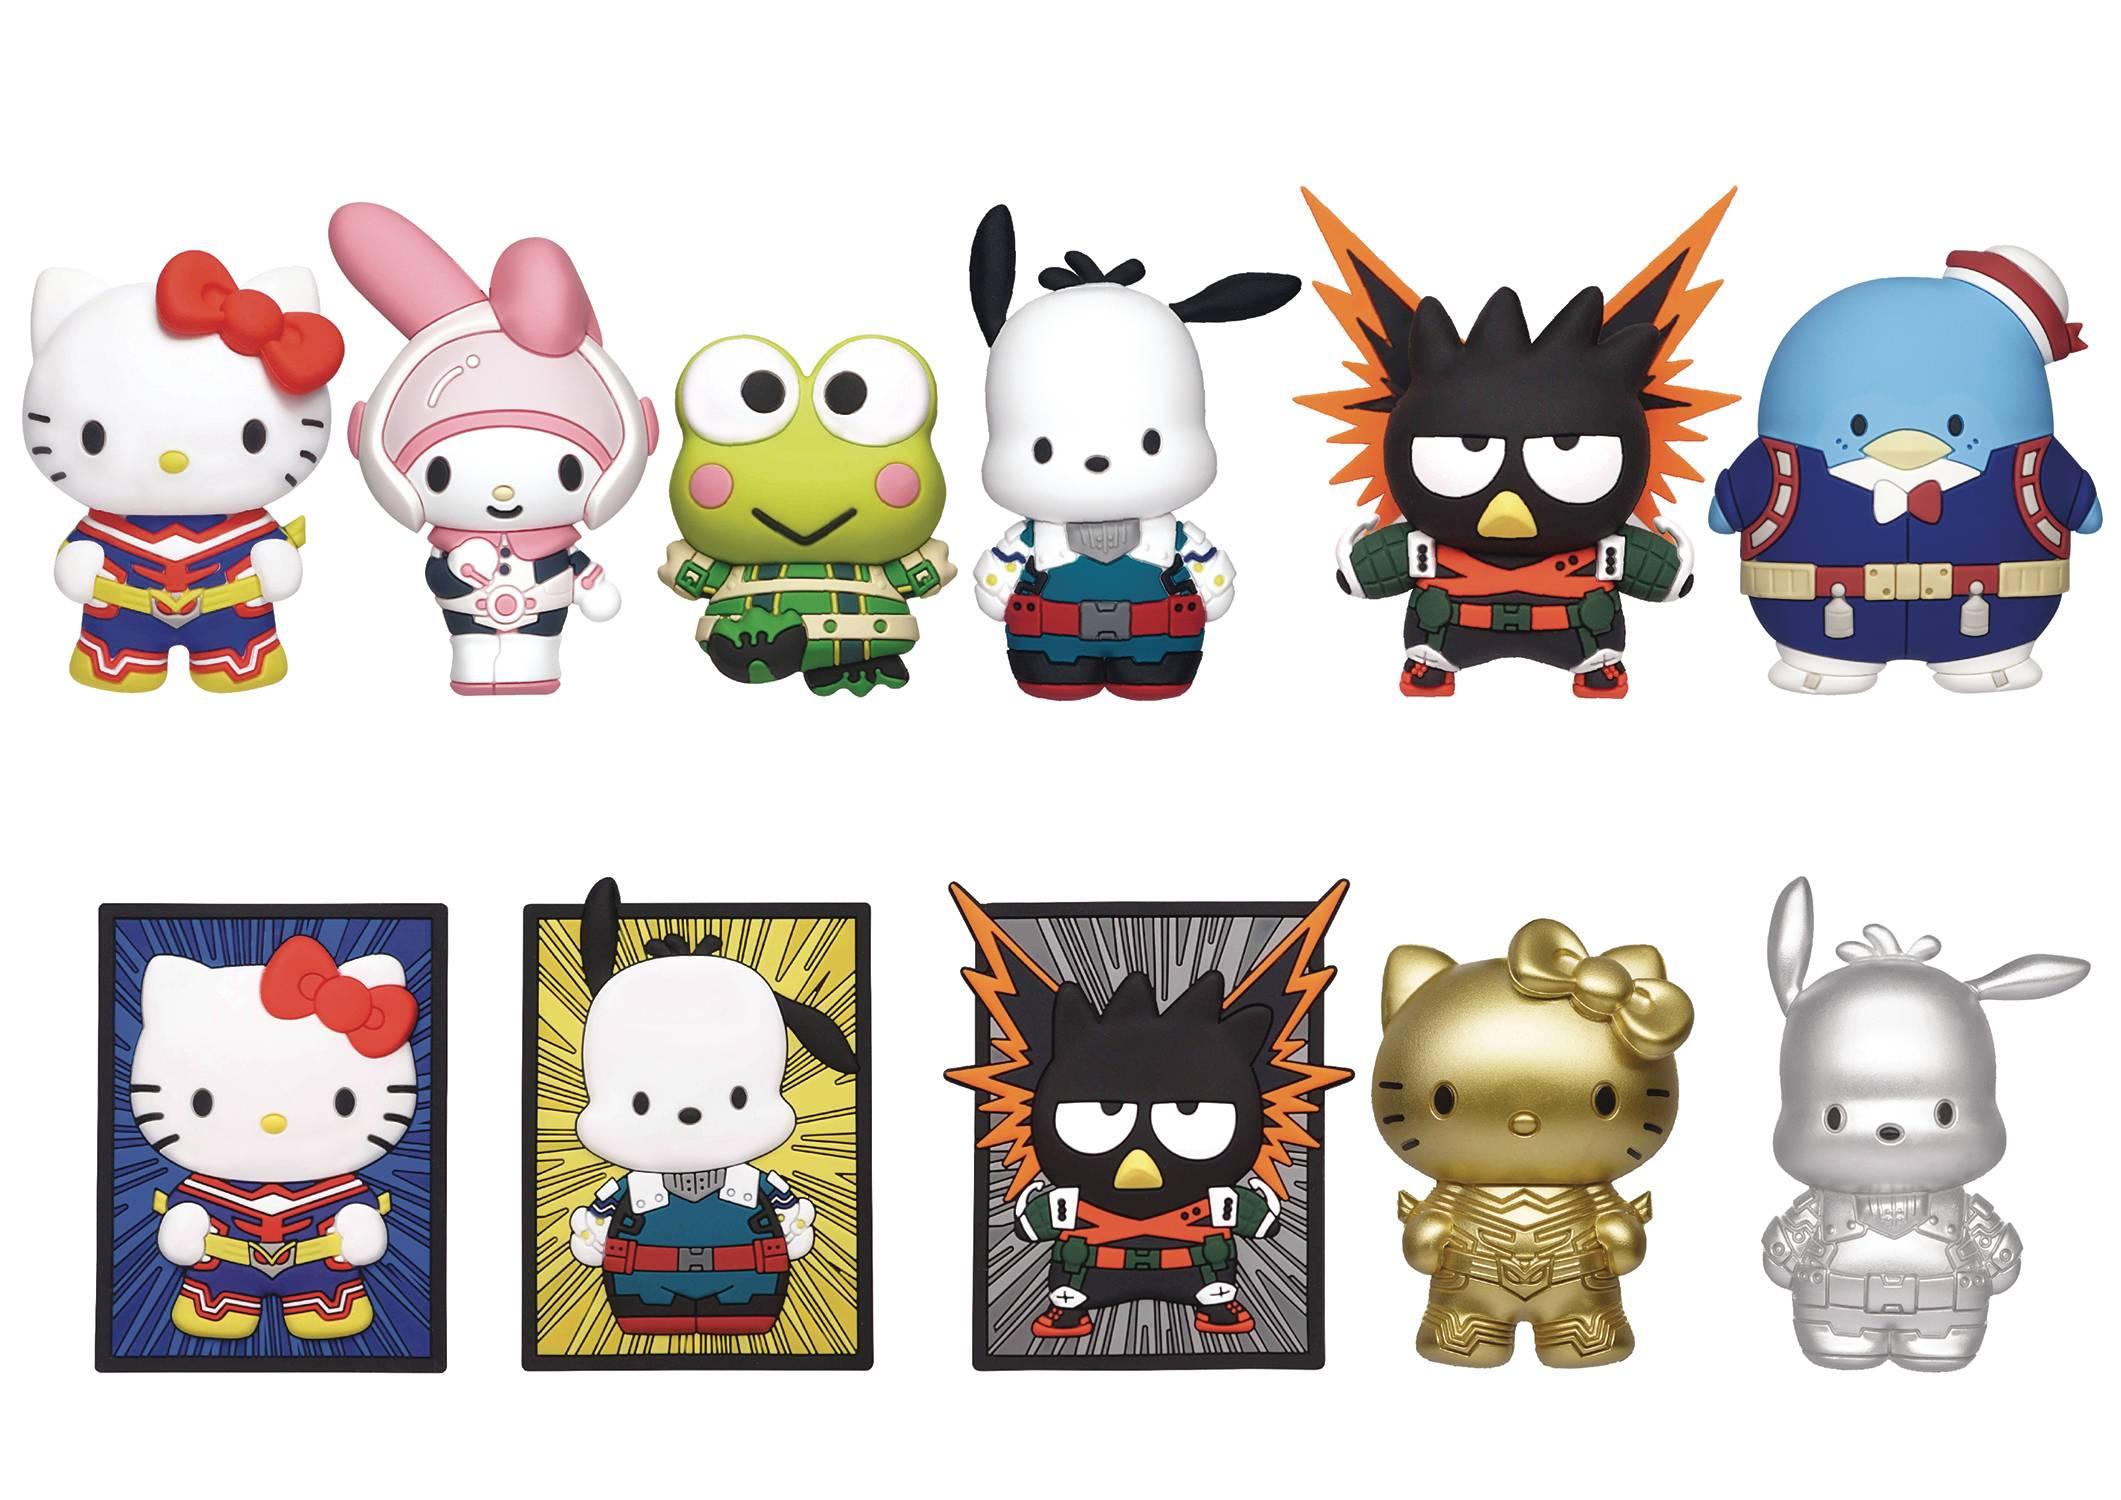 My Hero Academia Hello Kitty And Friends - Serie 1 - 3D Foam Figural Bag Clip - Hobby Champion Inc